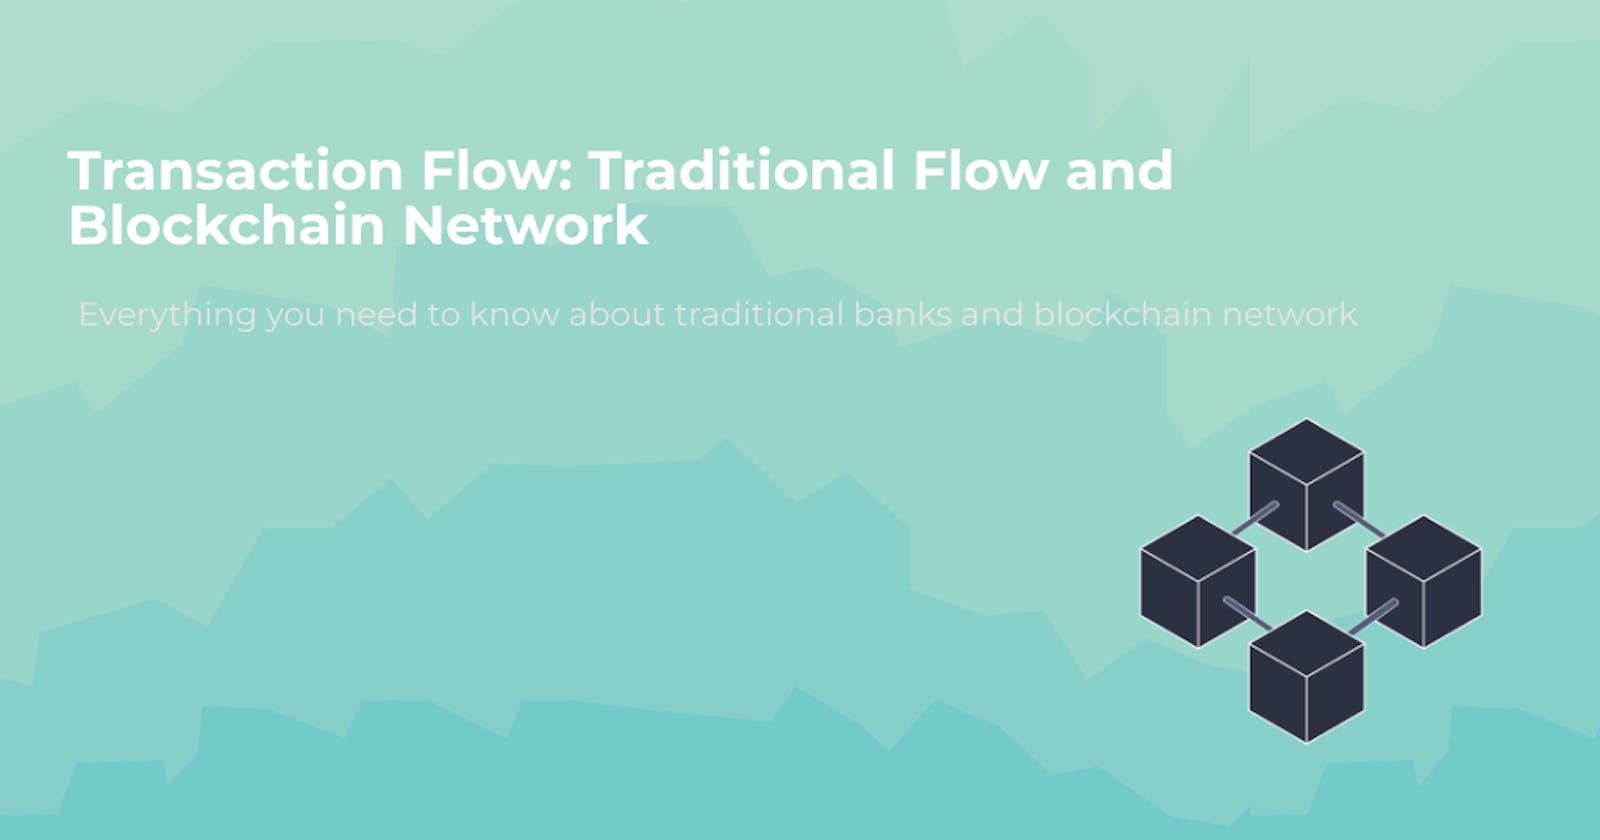 Transaction Flow: Traditional Flow and Blockchain Network